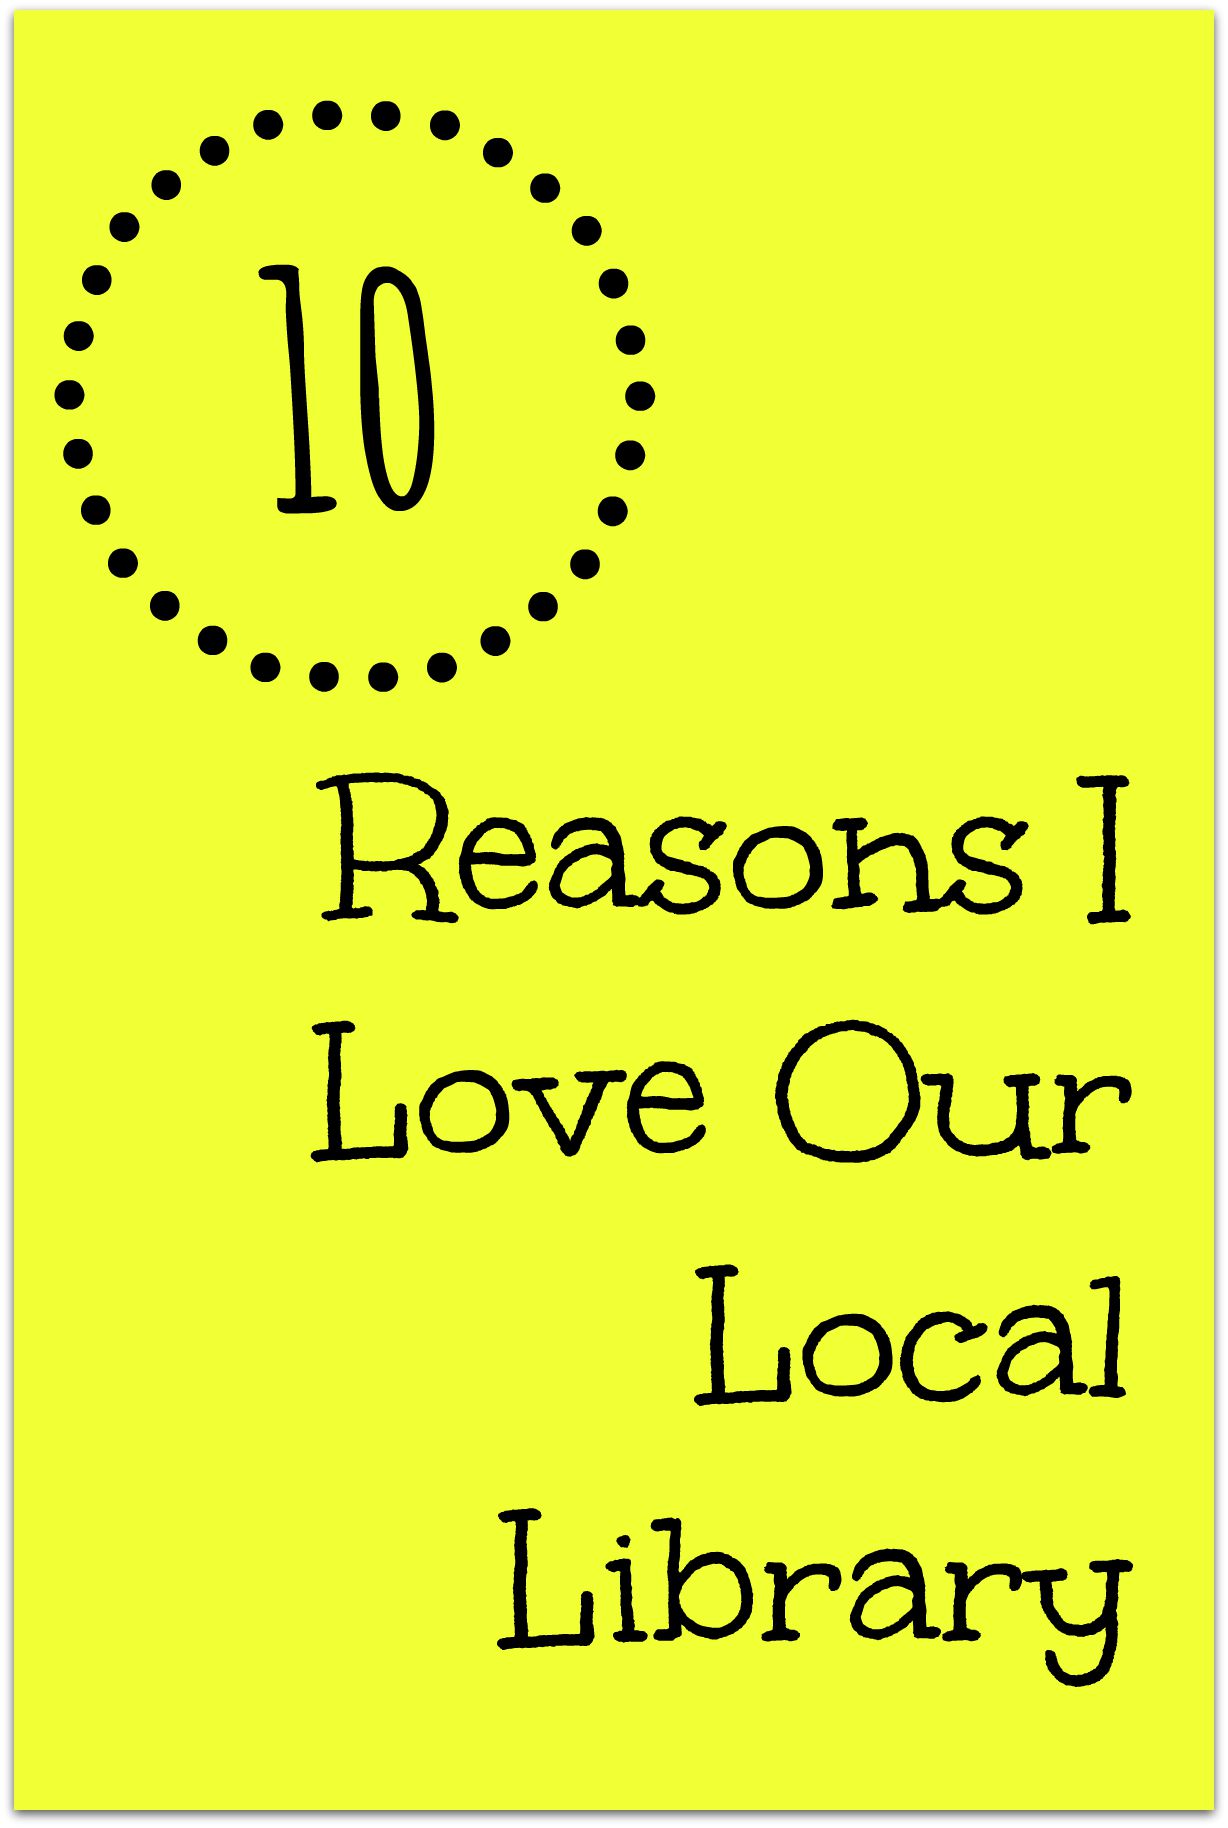 10 Reasons I Love Our Local Library